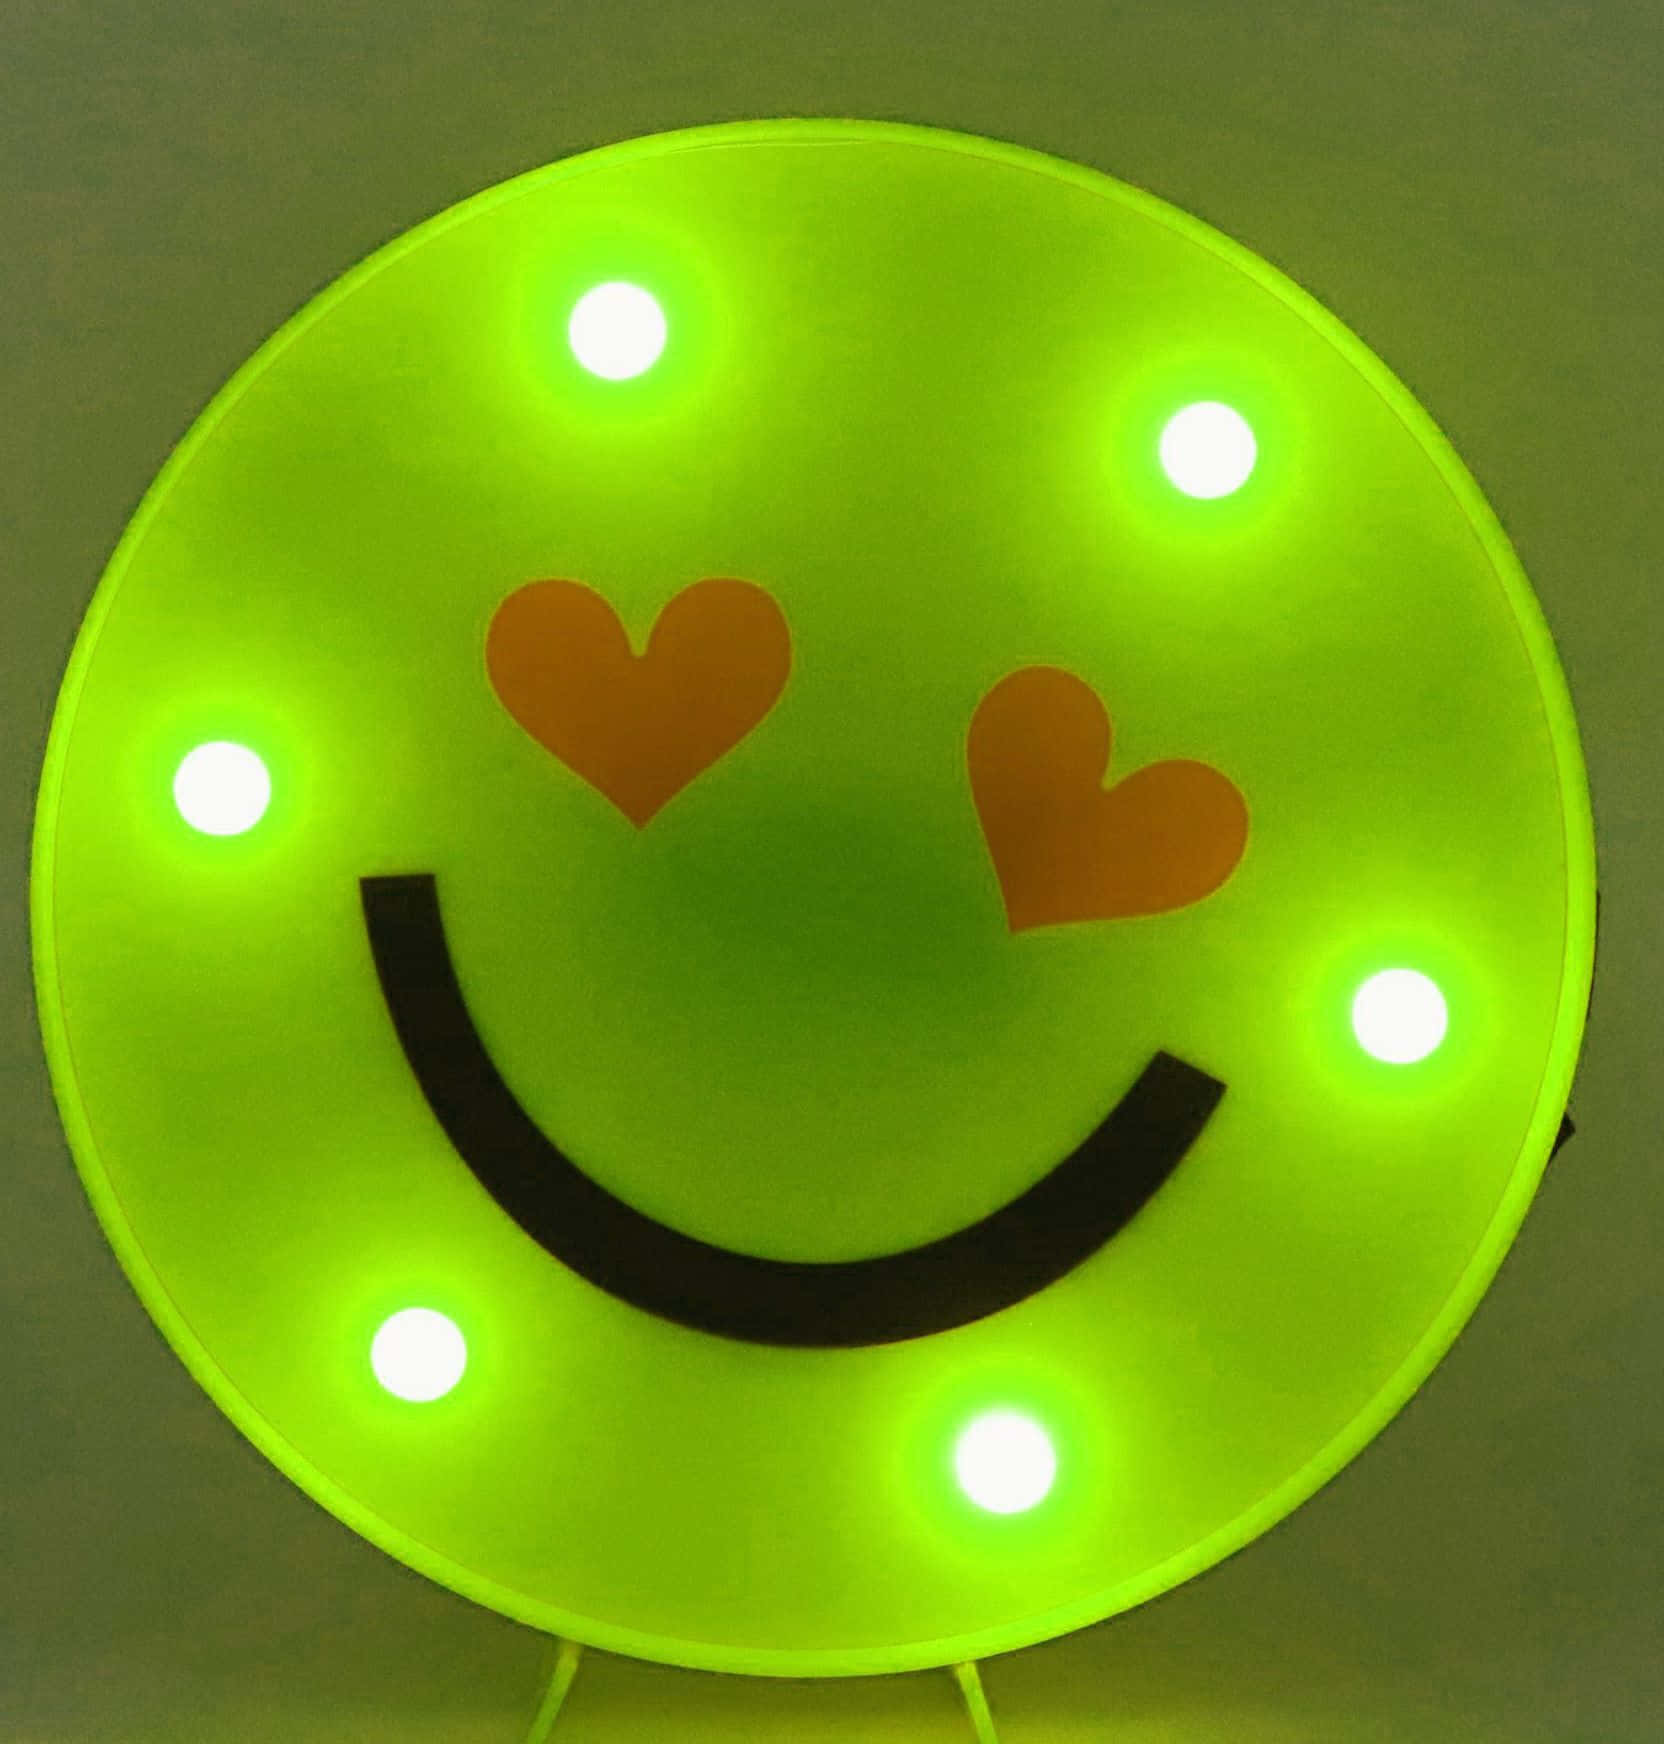 A Green Smiley Face With Lights On It